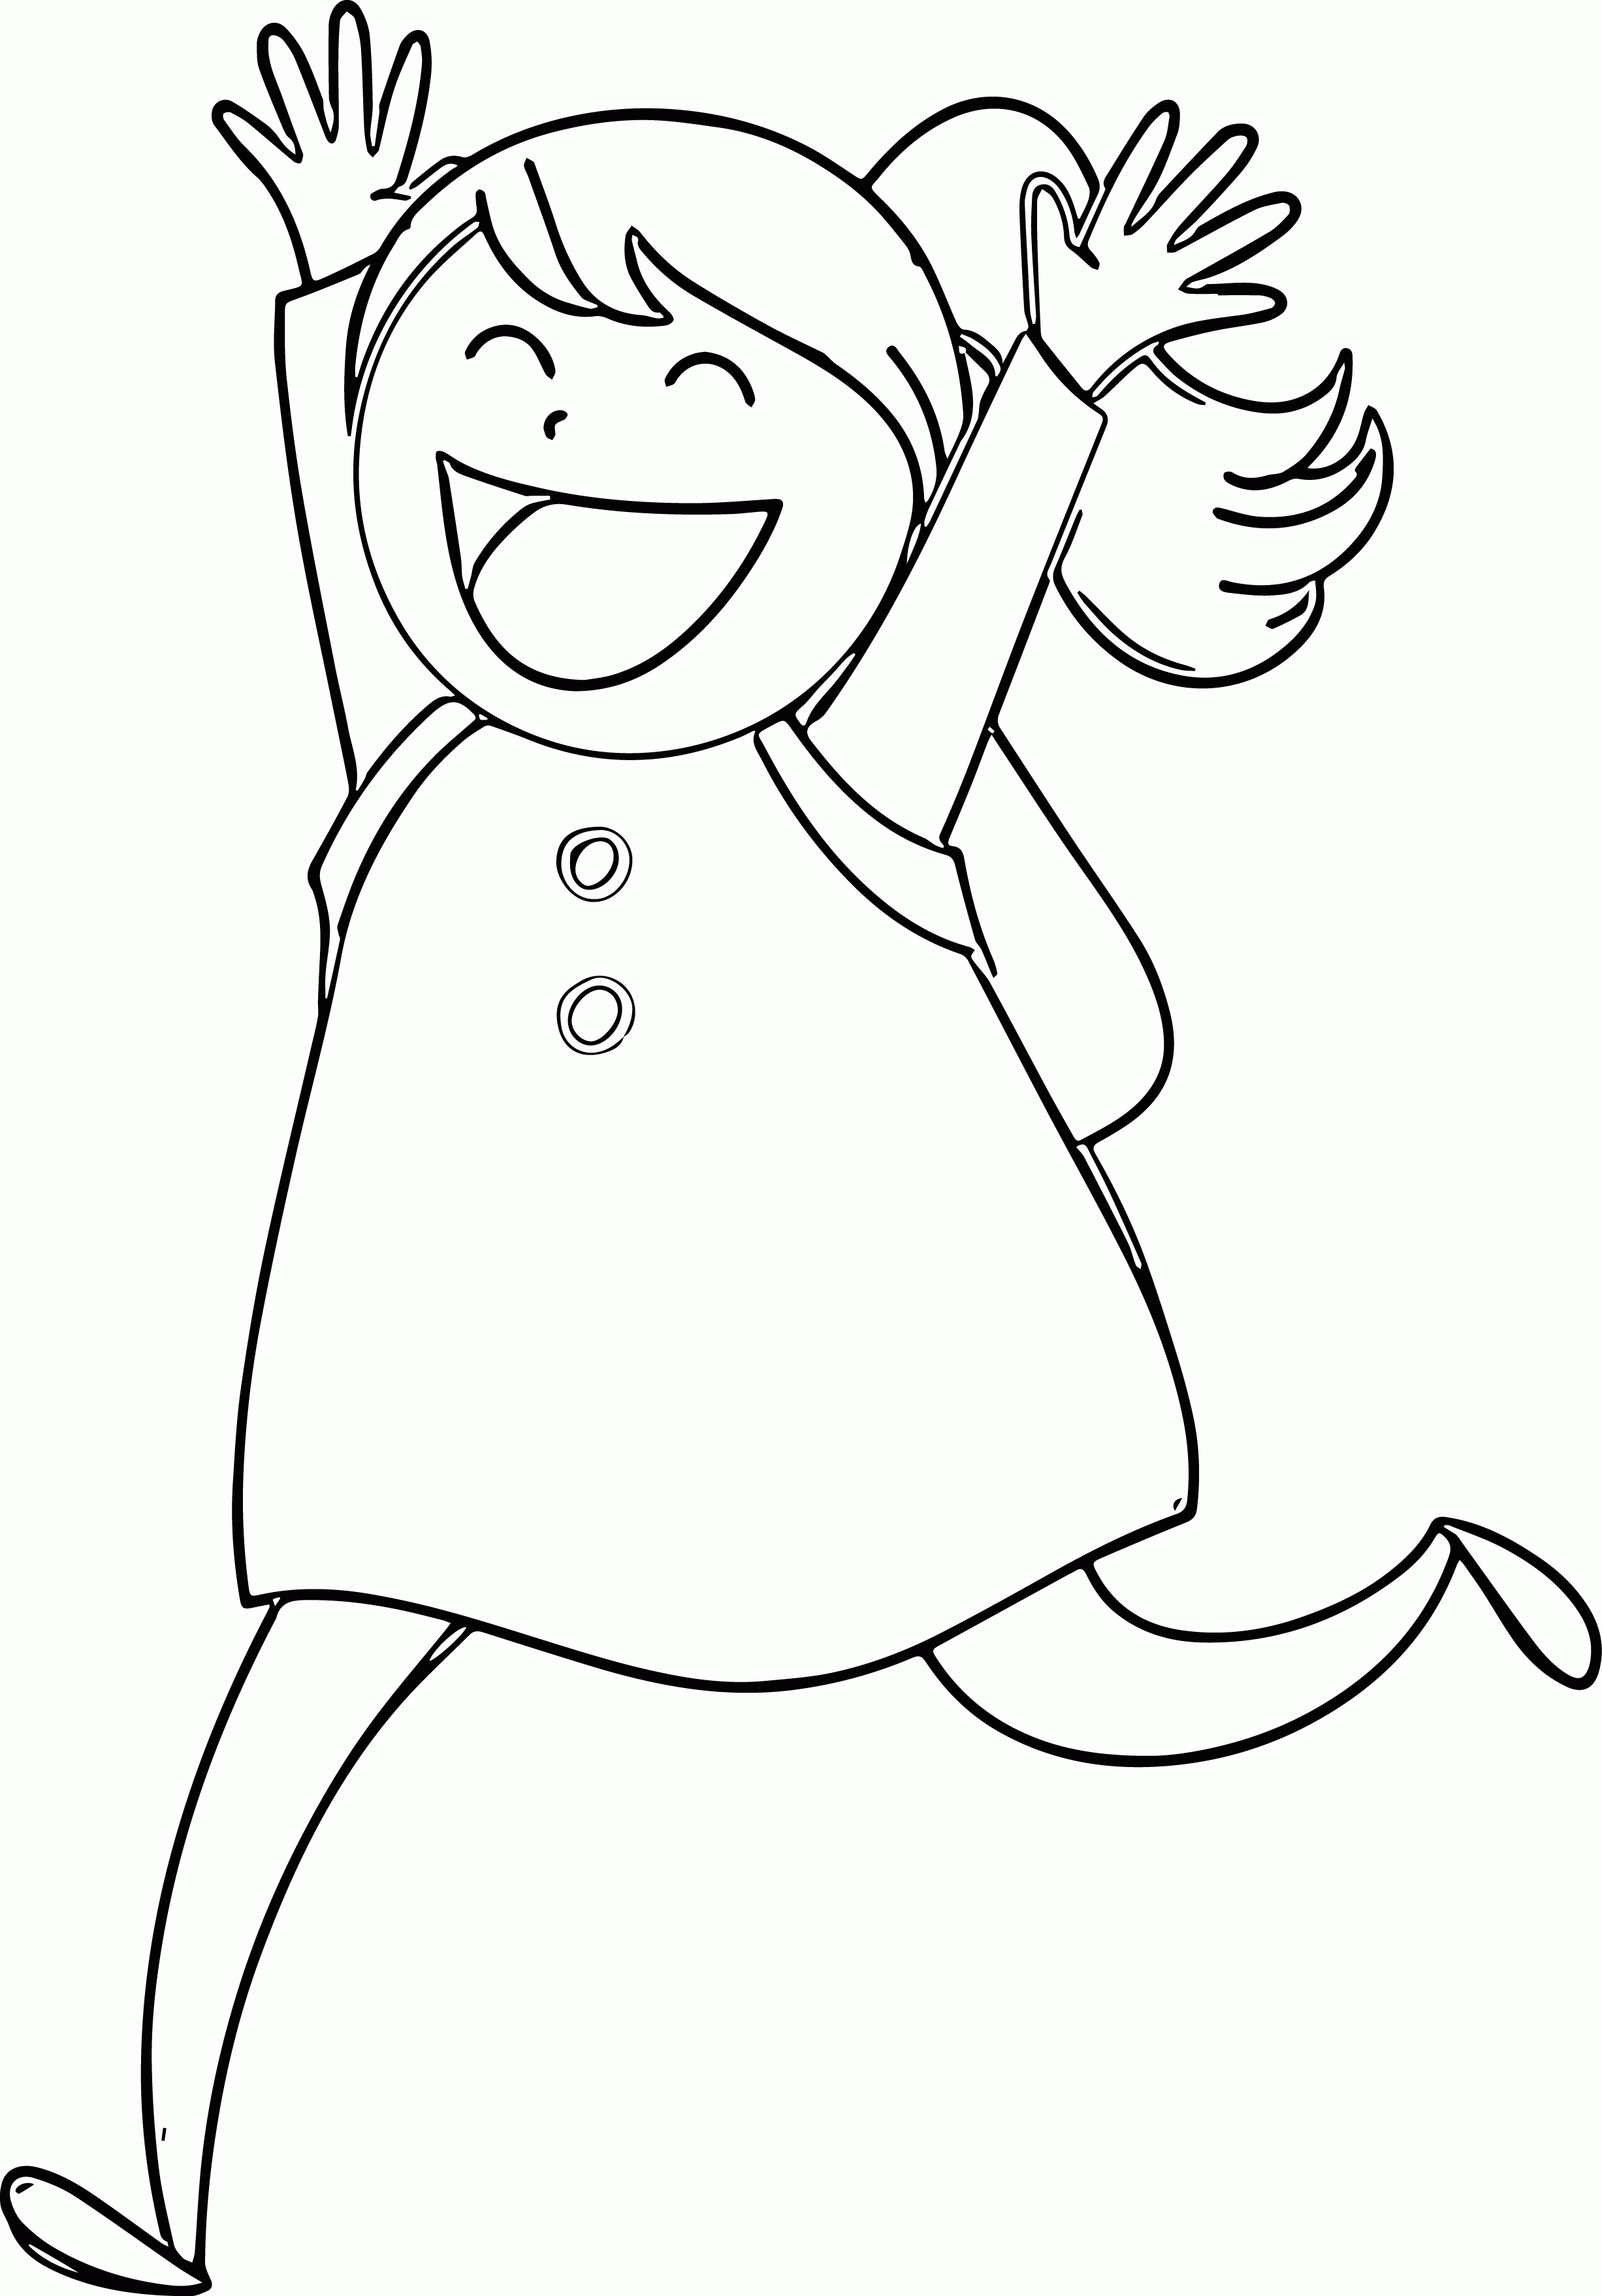 Be Happy Coloring Page Coloring Pages